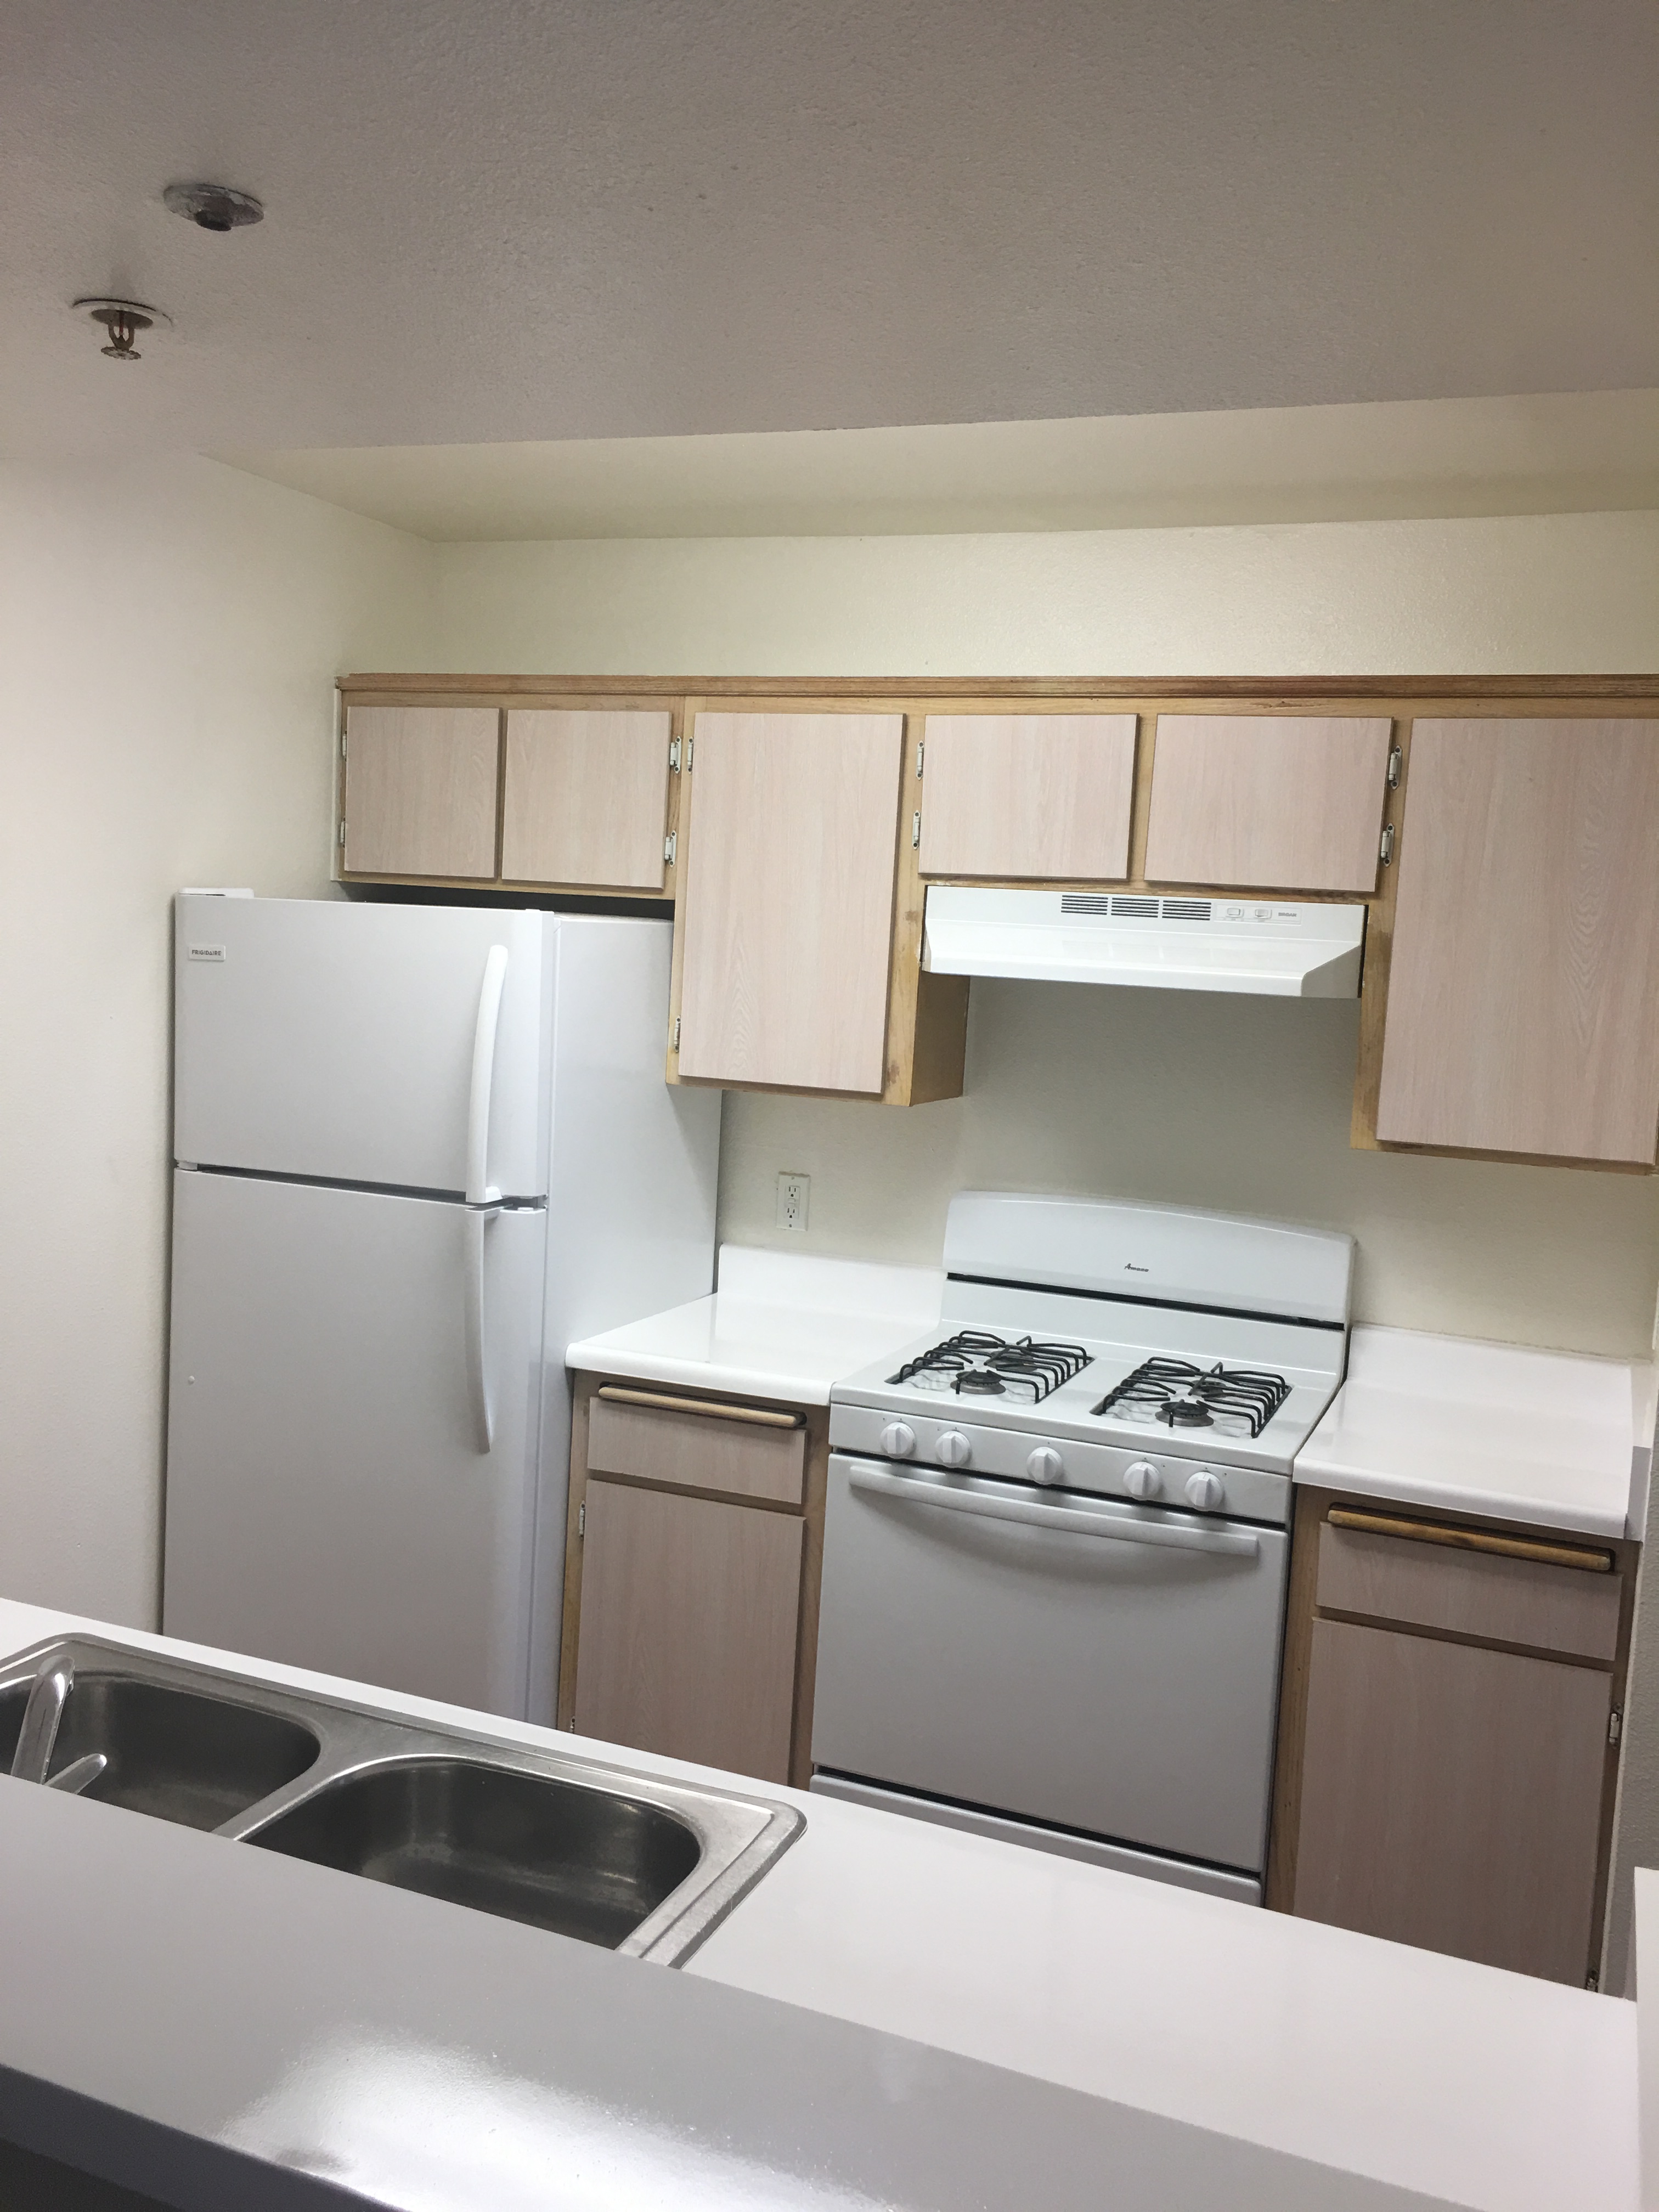 Appliances in the kitchen - white refrigerator/freezer, white gas oven/stove with ventilator, sand-colored cabinets